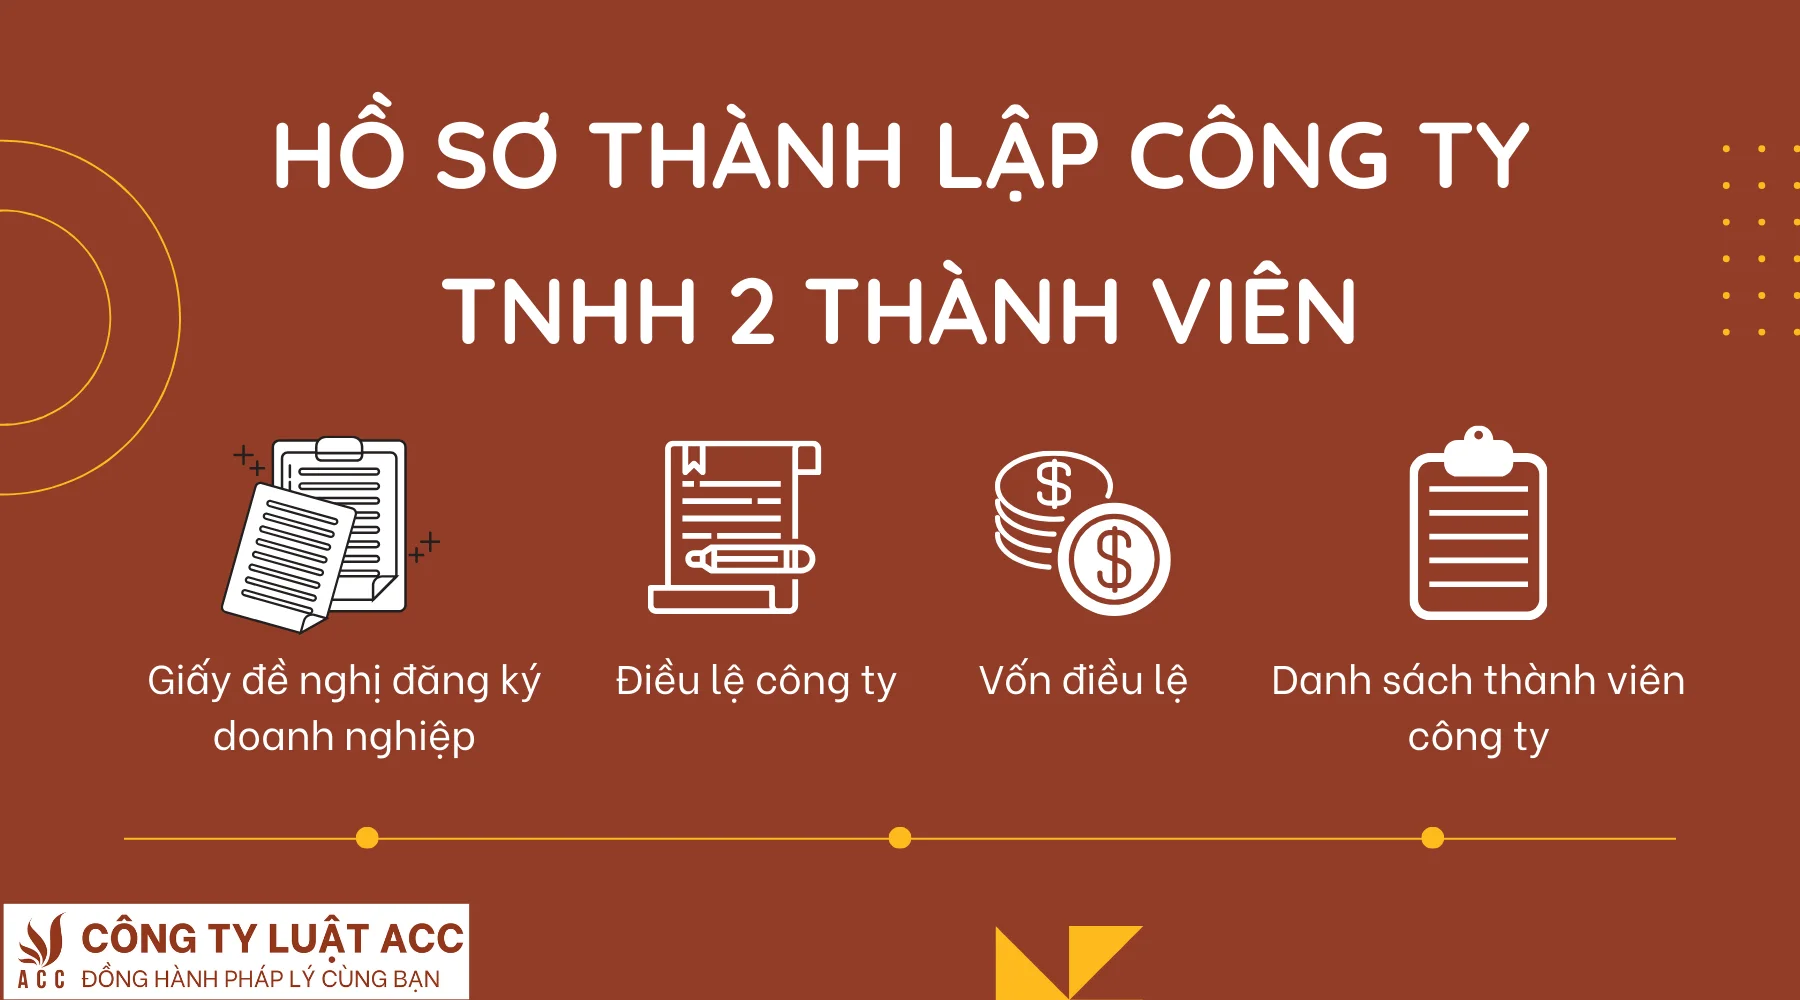 ho-so-thanh-lap-cong-ty-tnhh-2-thanh-vien